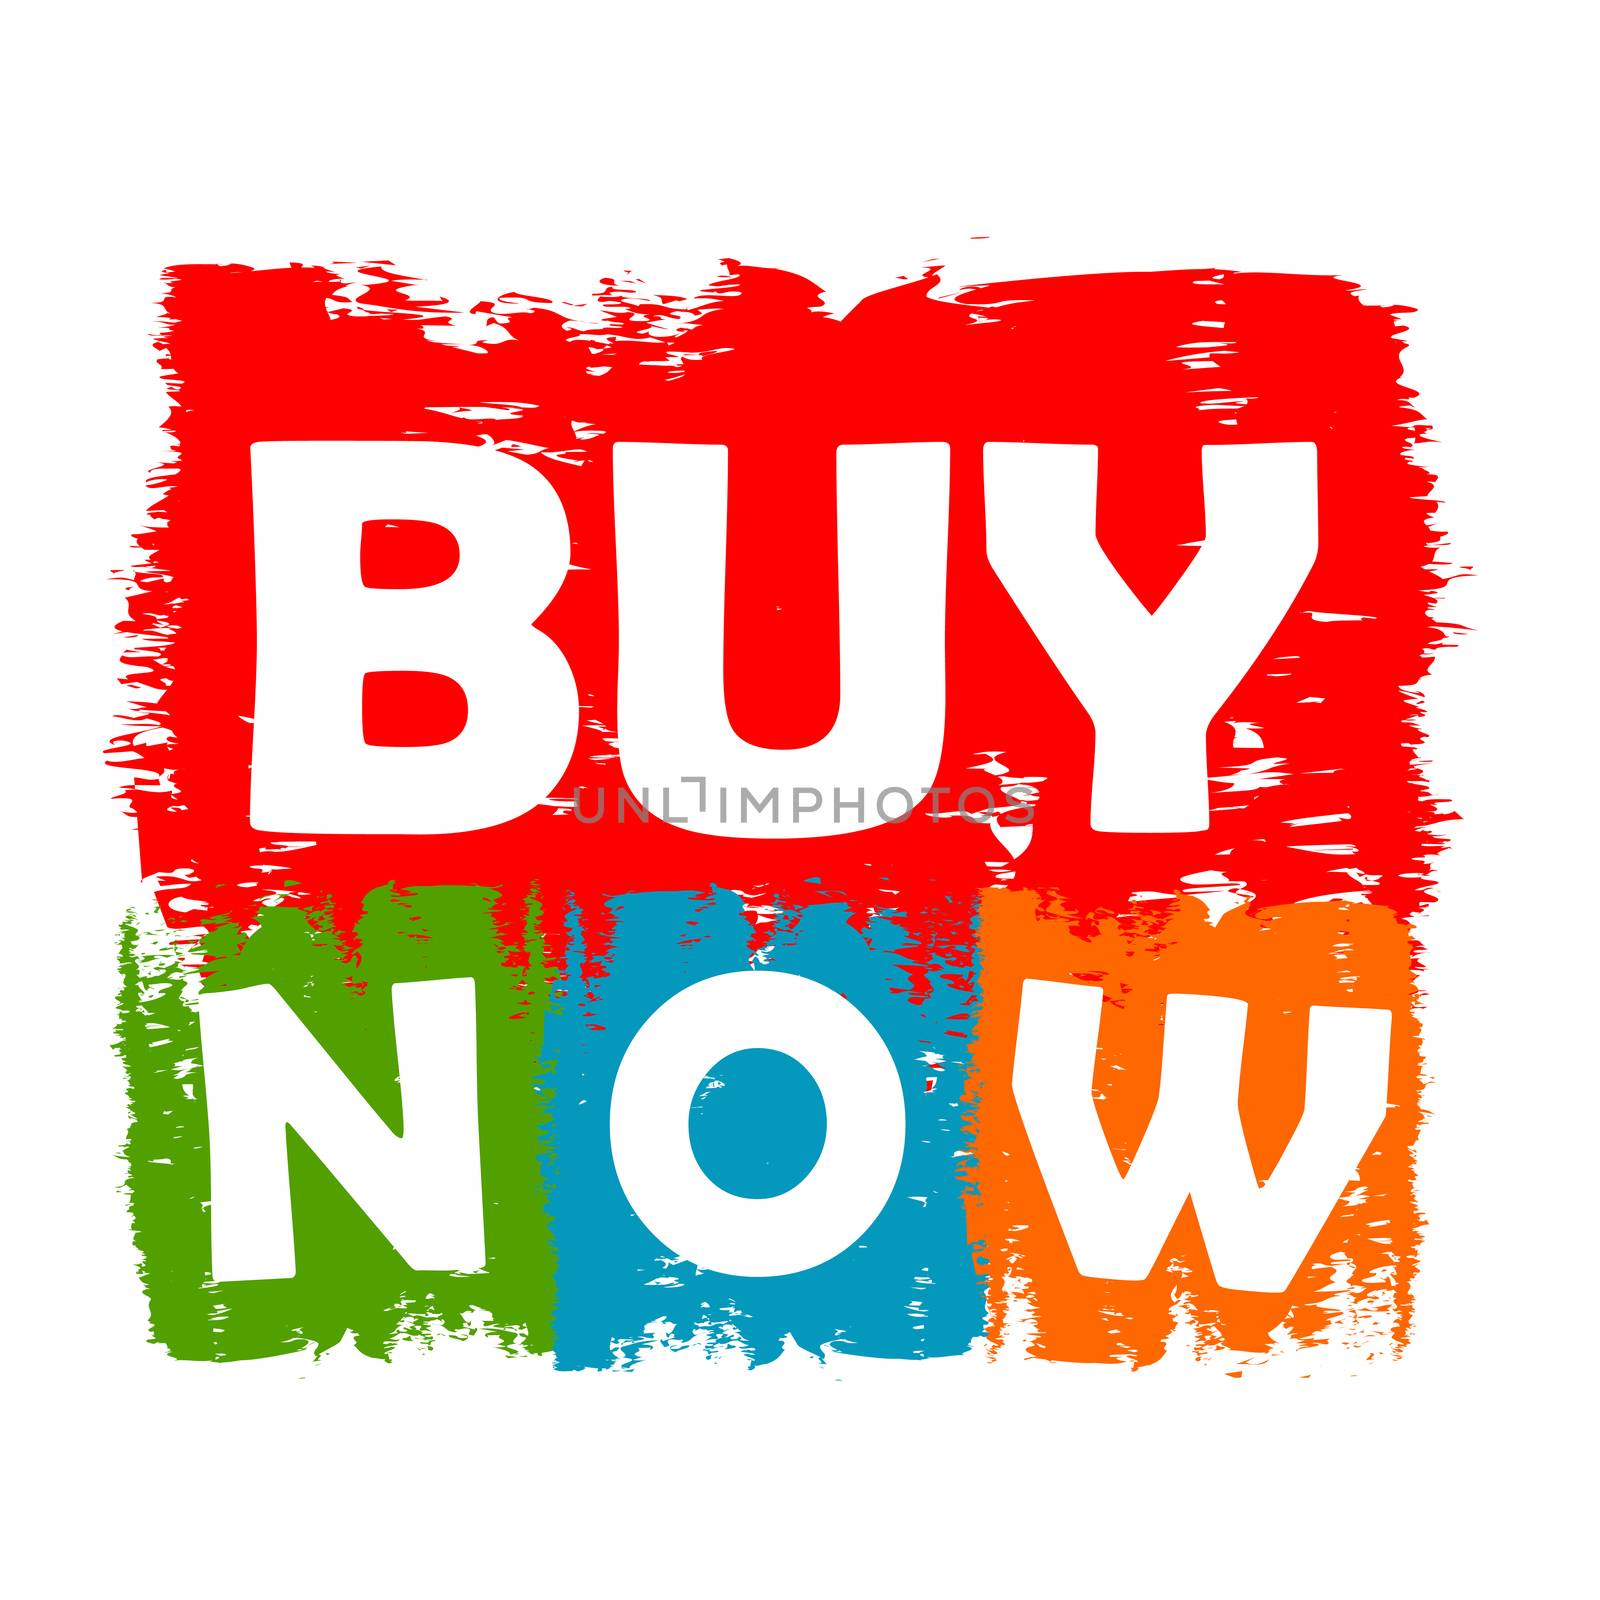 buy now drawn label - text in red, green, blue, orange and purple banner, business shopping and e-commerce concept